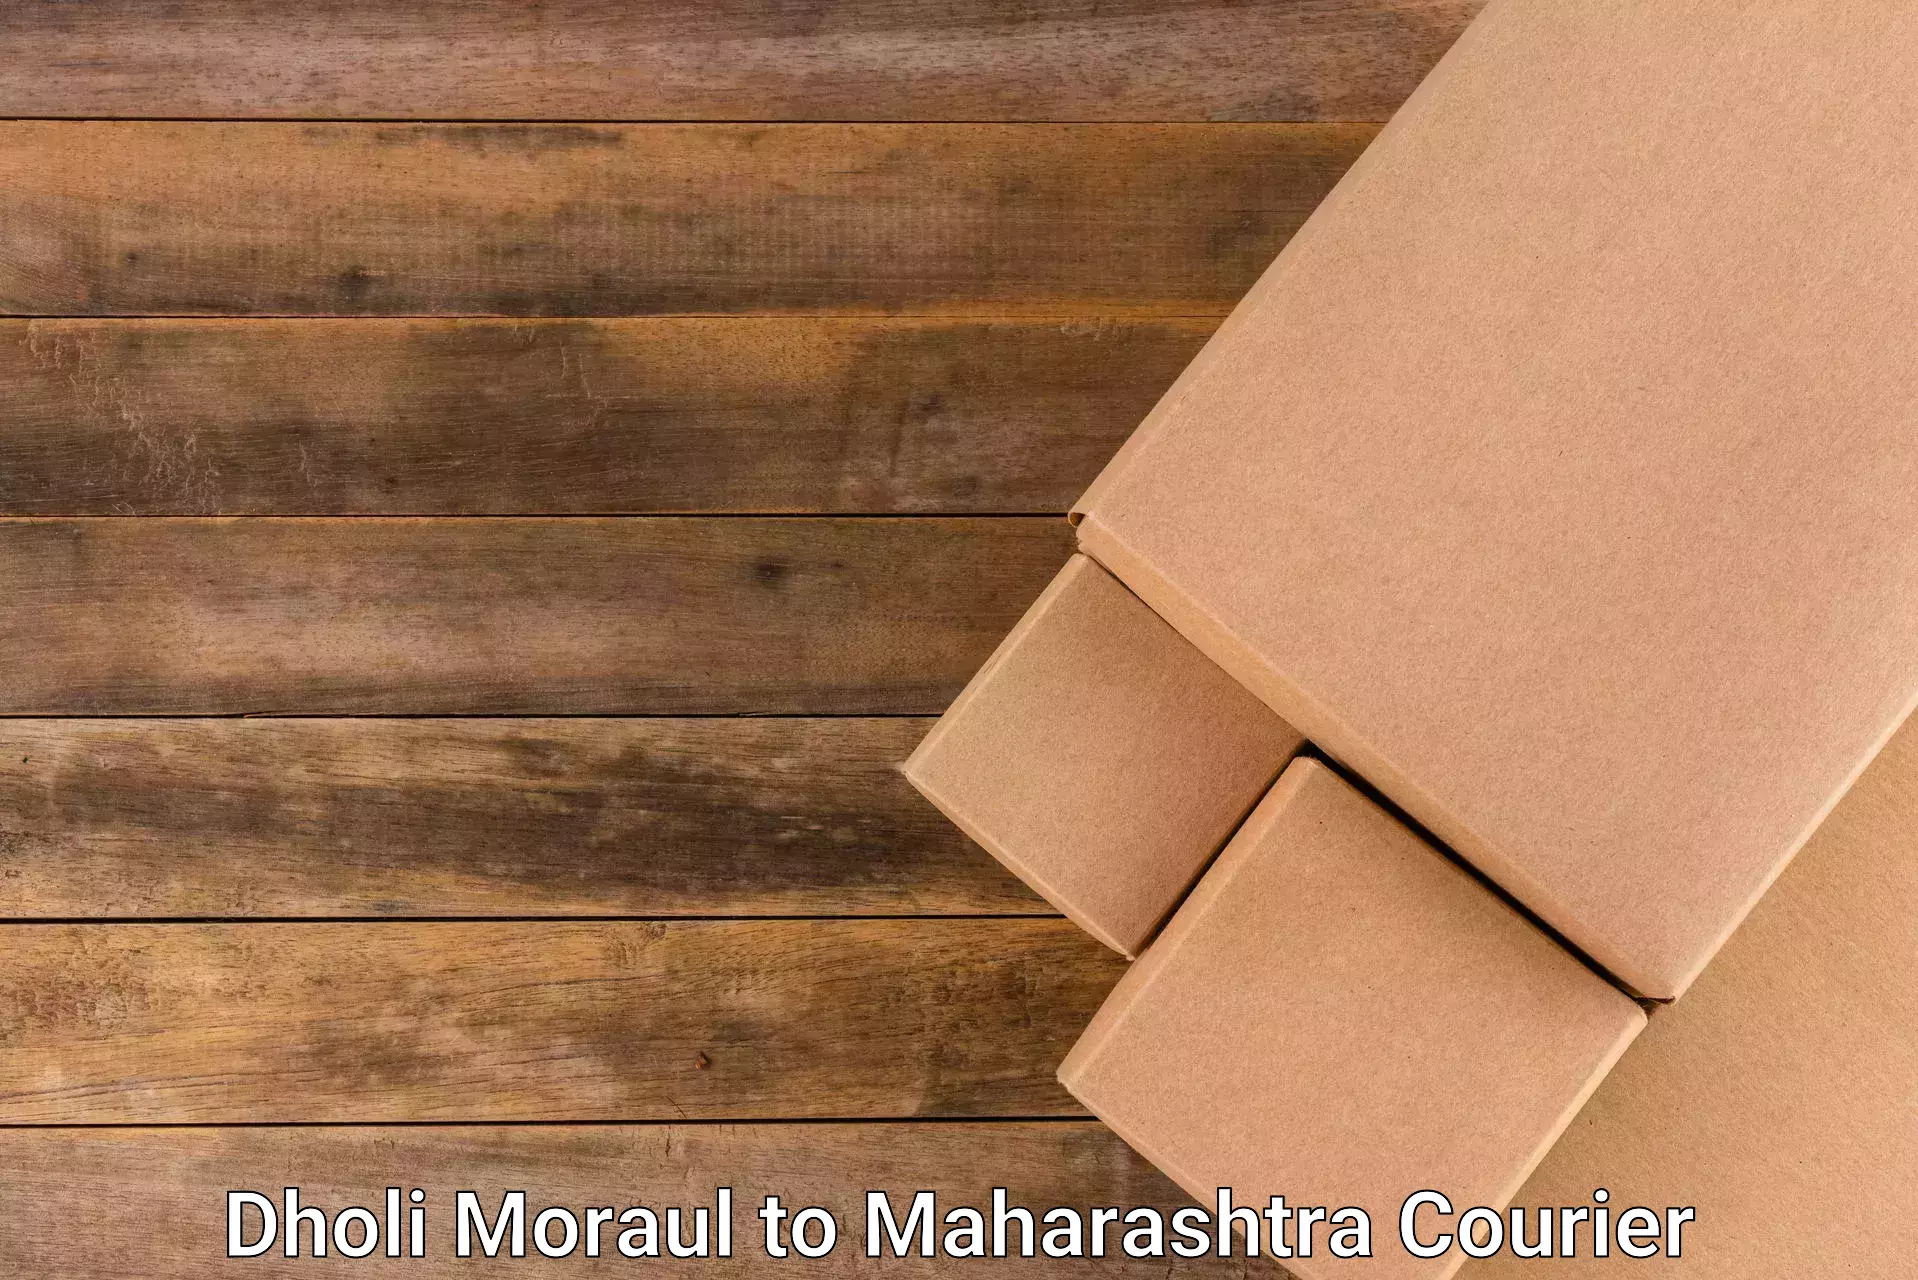 Package delivery network Dholi Moraul to Buldhana